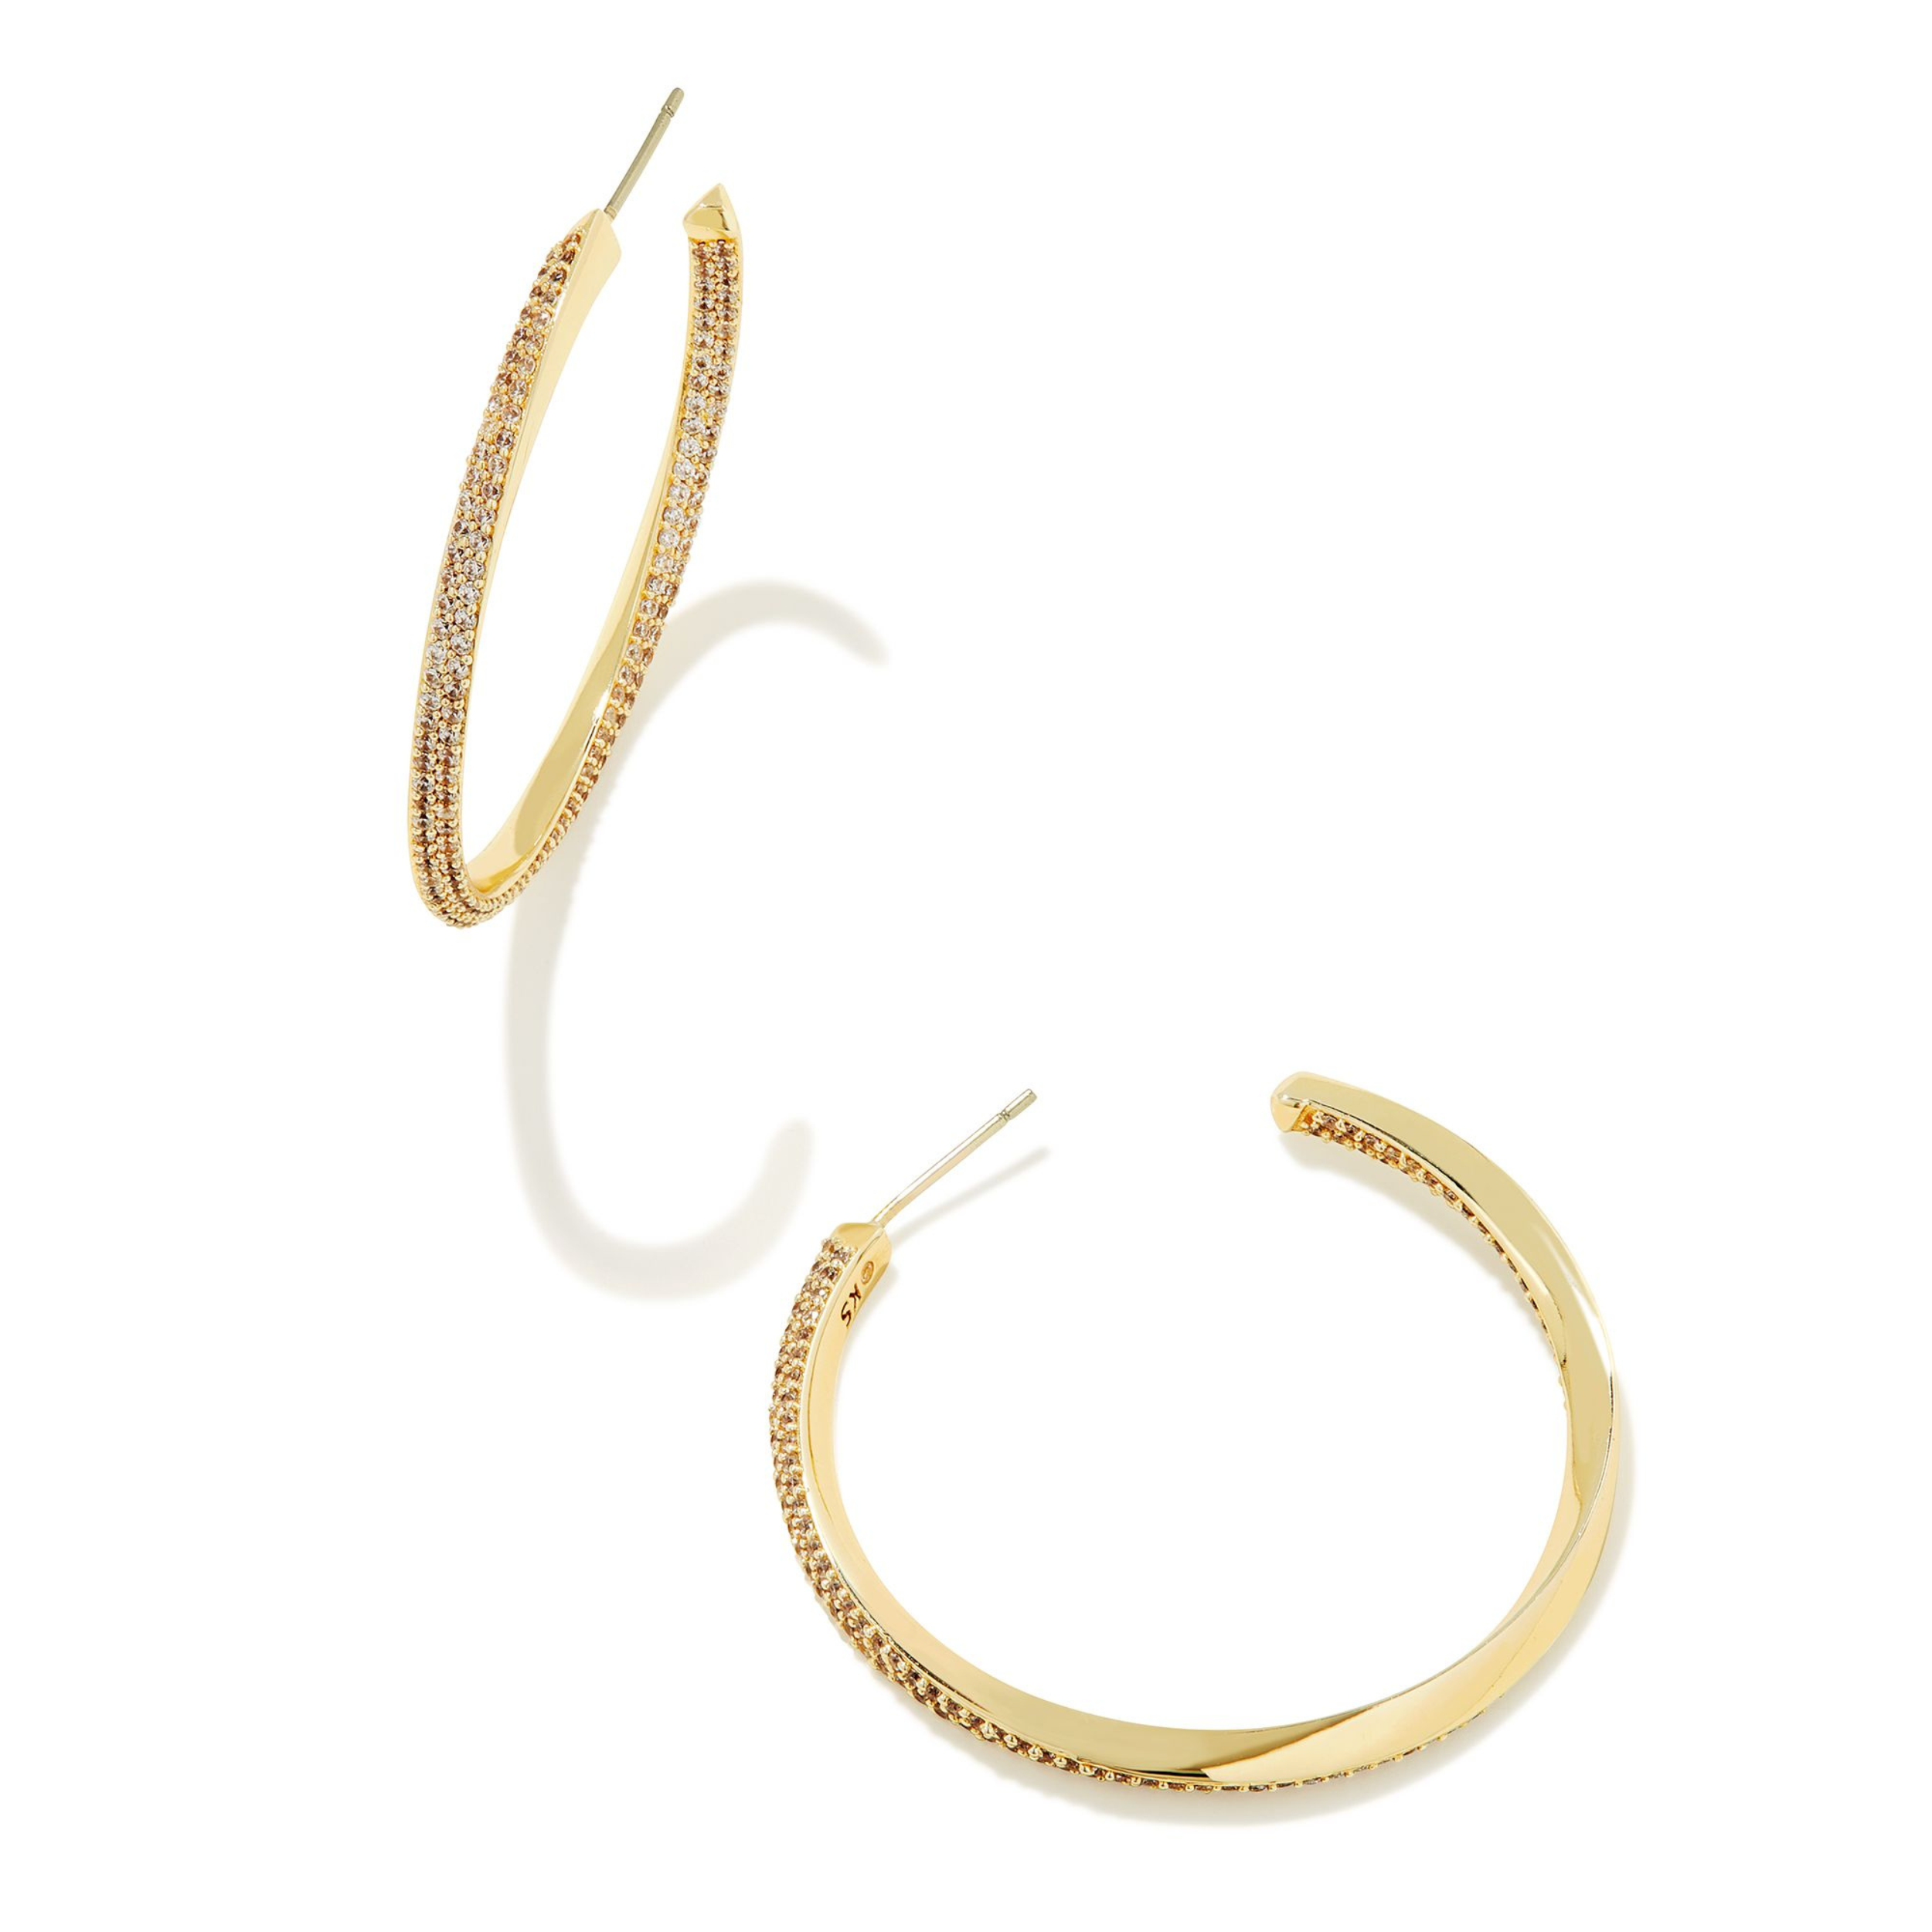 Gold hoop huggie twist earrings with cz crystals pictured on a white background. 